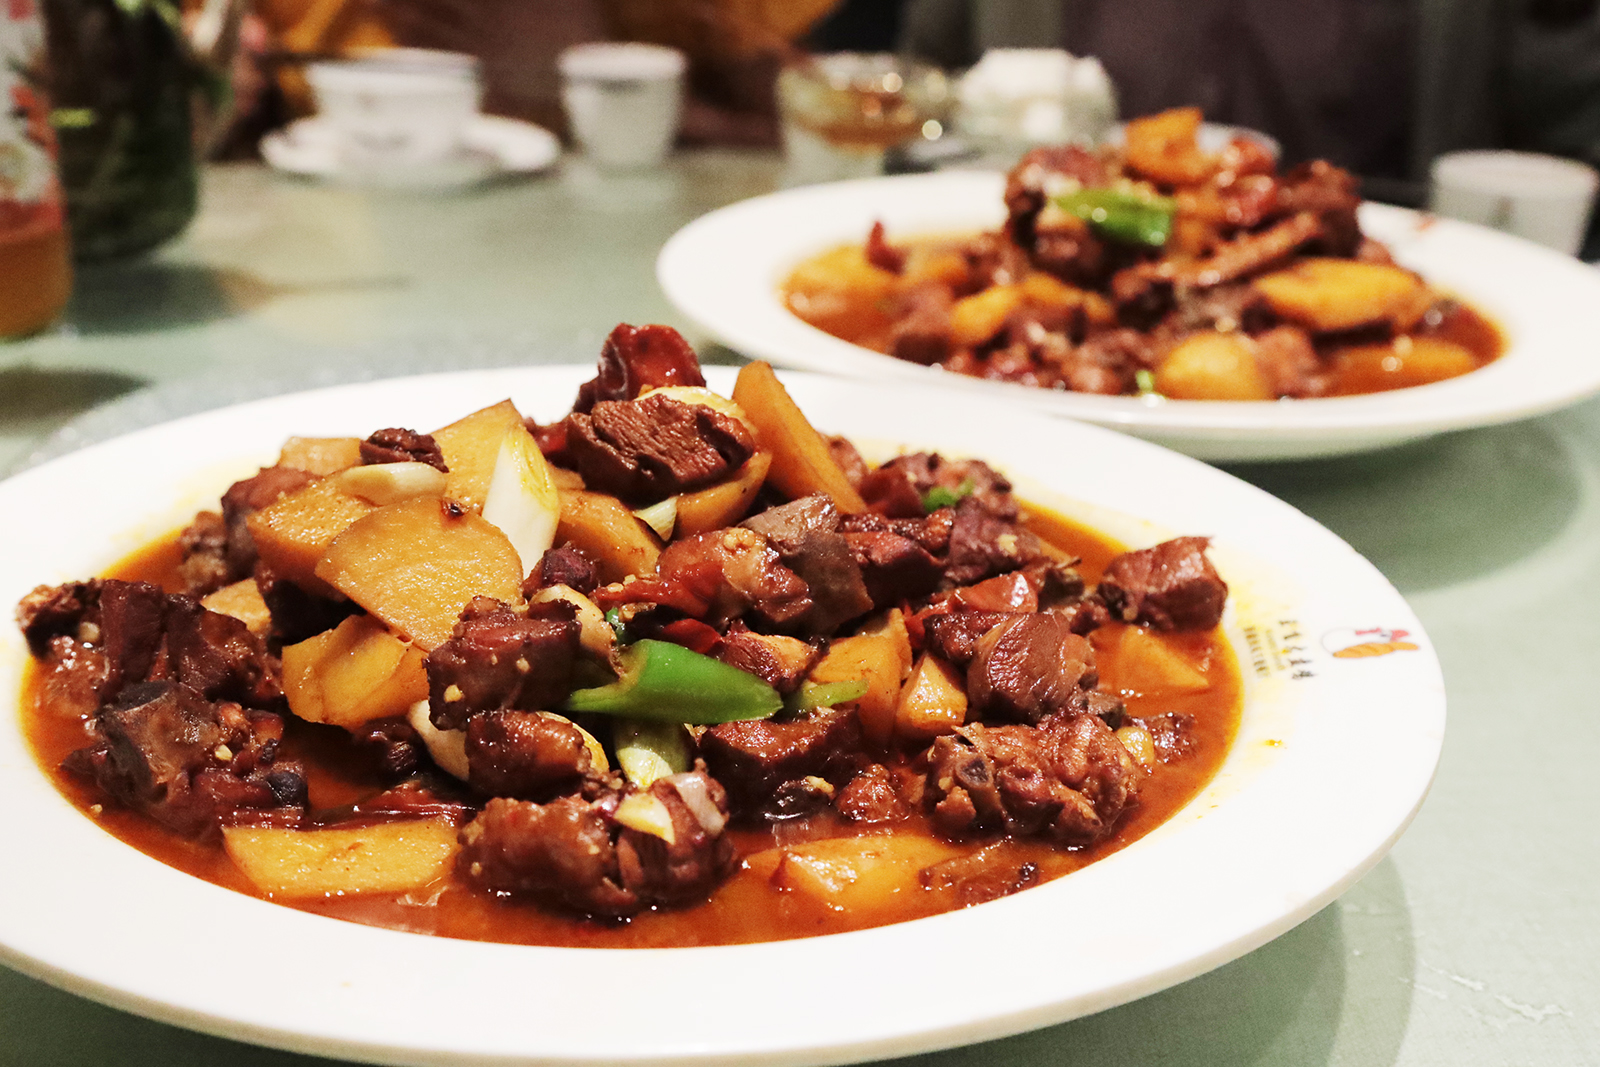 Plates of big plate chicken are served at a restaurant in Xinjiang. /CGTN